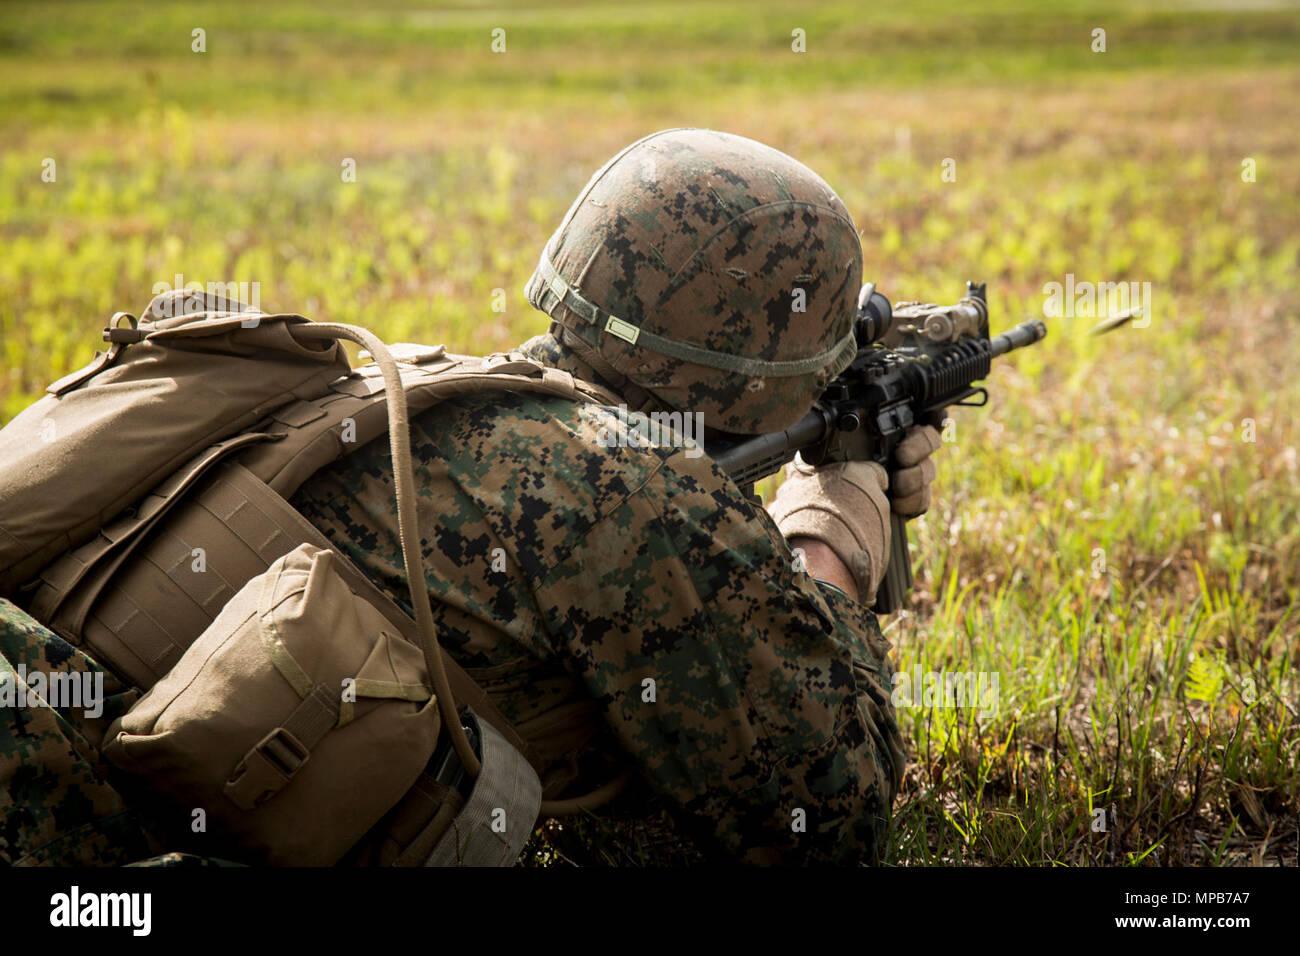 A U.S. Marine attached to Advanced Infantry Training Battalion, School of Infantry-East (SOI-E), fires an M4A1 carbine during a combined arms exercise at Camp Lejeune, N.C., April 7, 2017. The mission of SOI-E is to train entry-level and advanced level Marines in the skills required of an Infantry Marine for the operating forces. Stock Photo